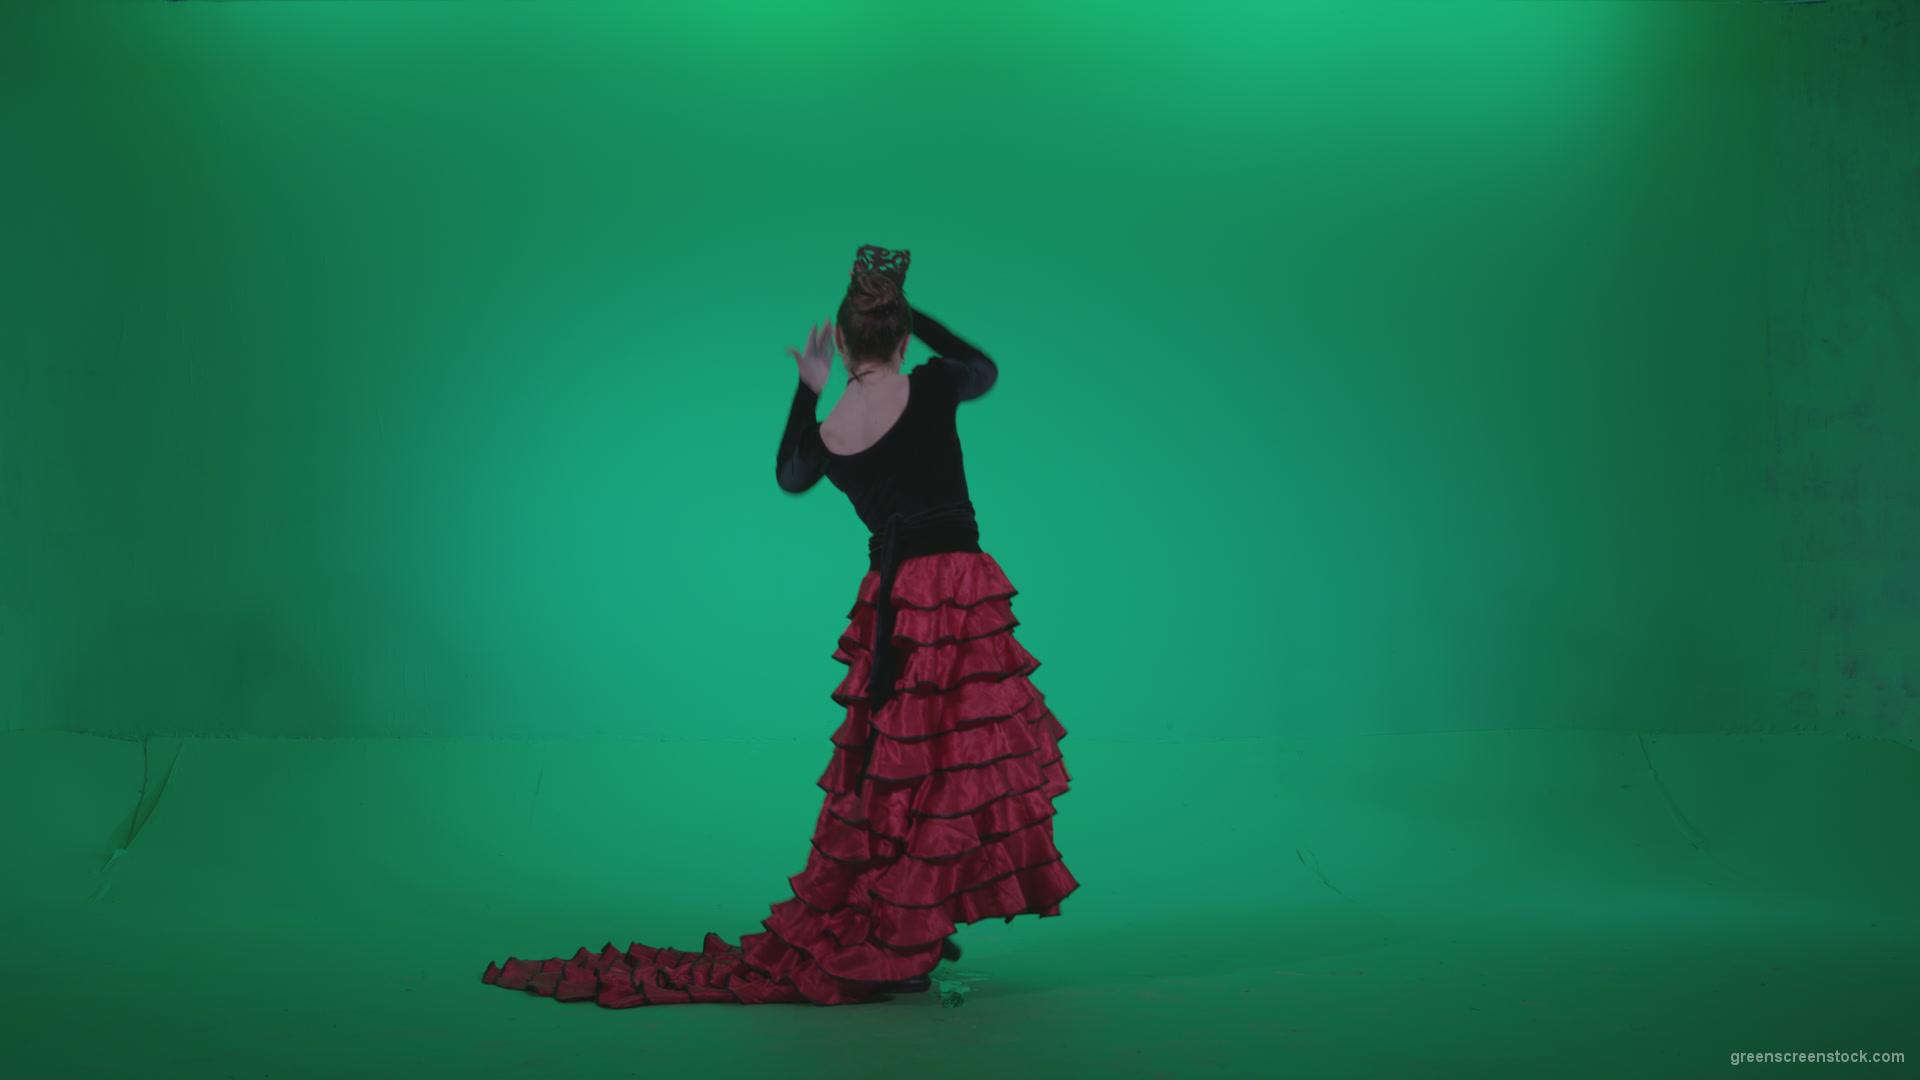 Flamenco-Red-and-Black-Dress-rb11-Green-Screen-Video-Footage_007 Green Screen Stock